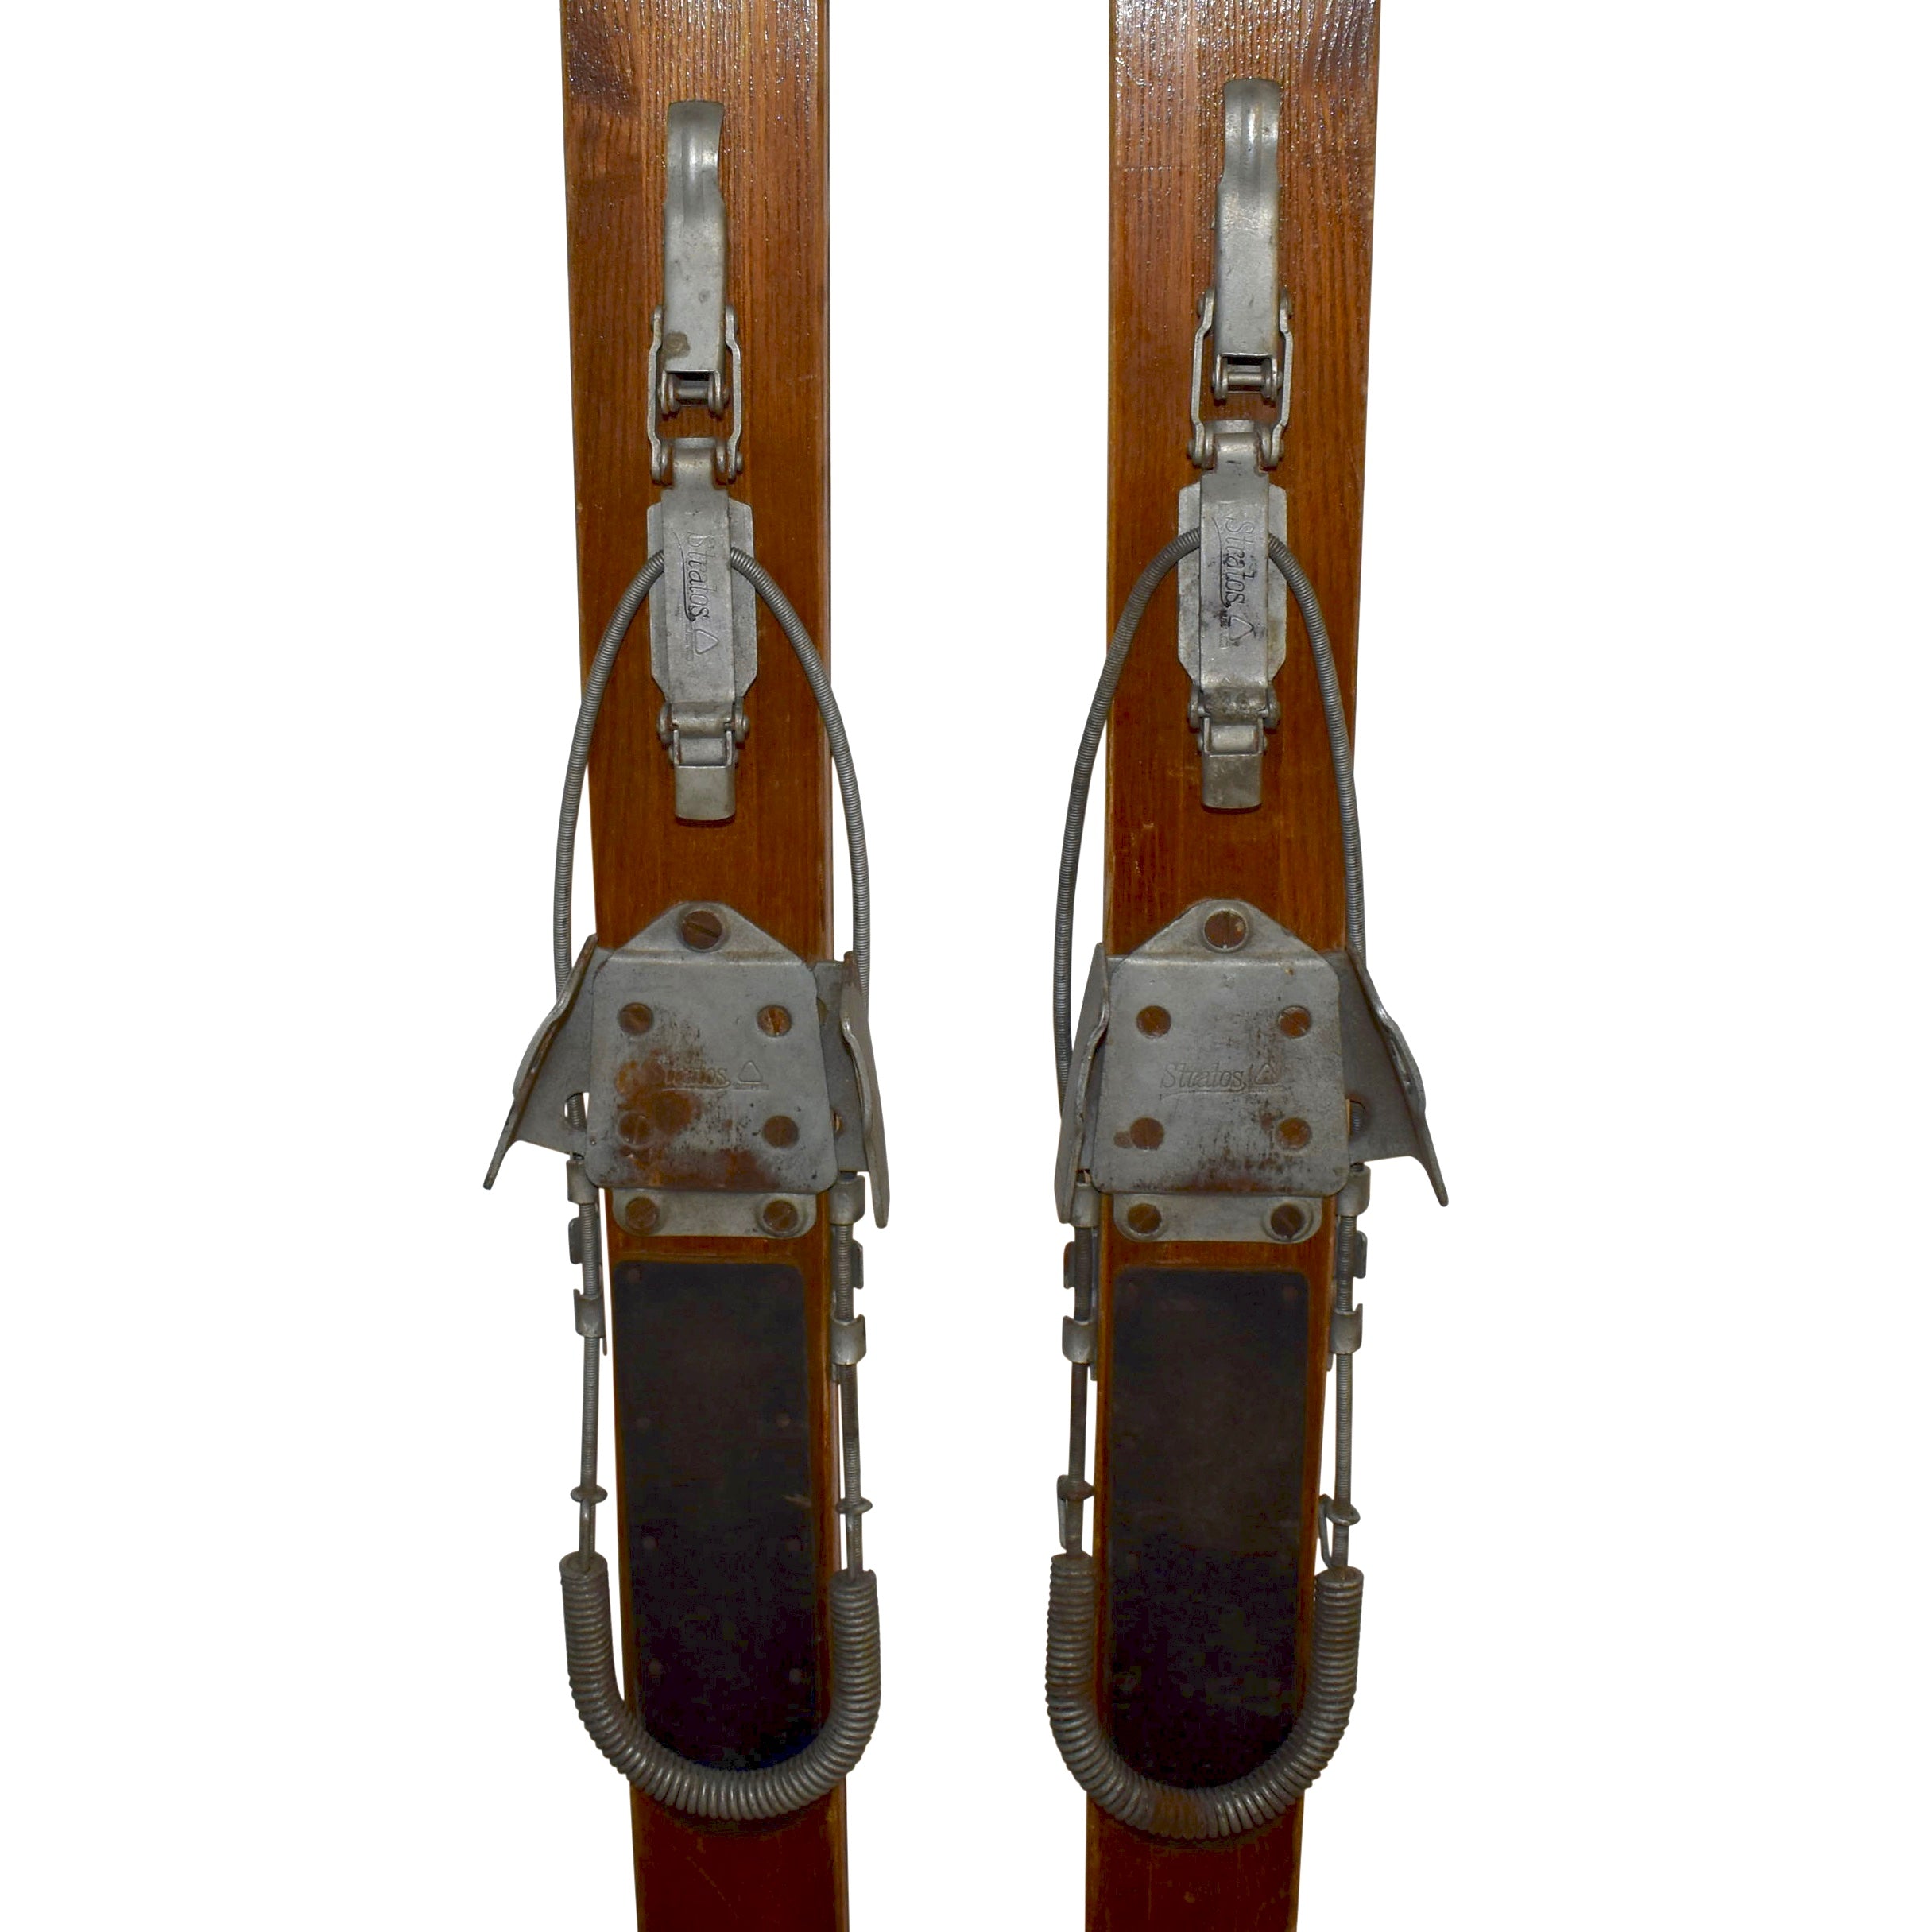 Flat Top Skis with Stratos Cable Bindings